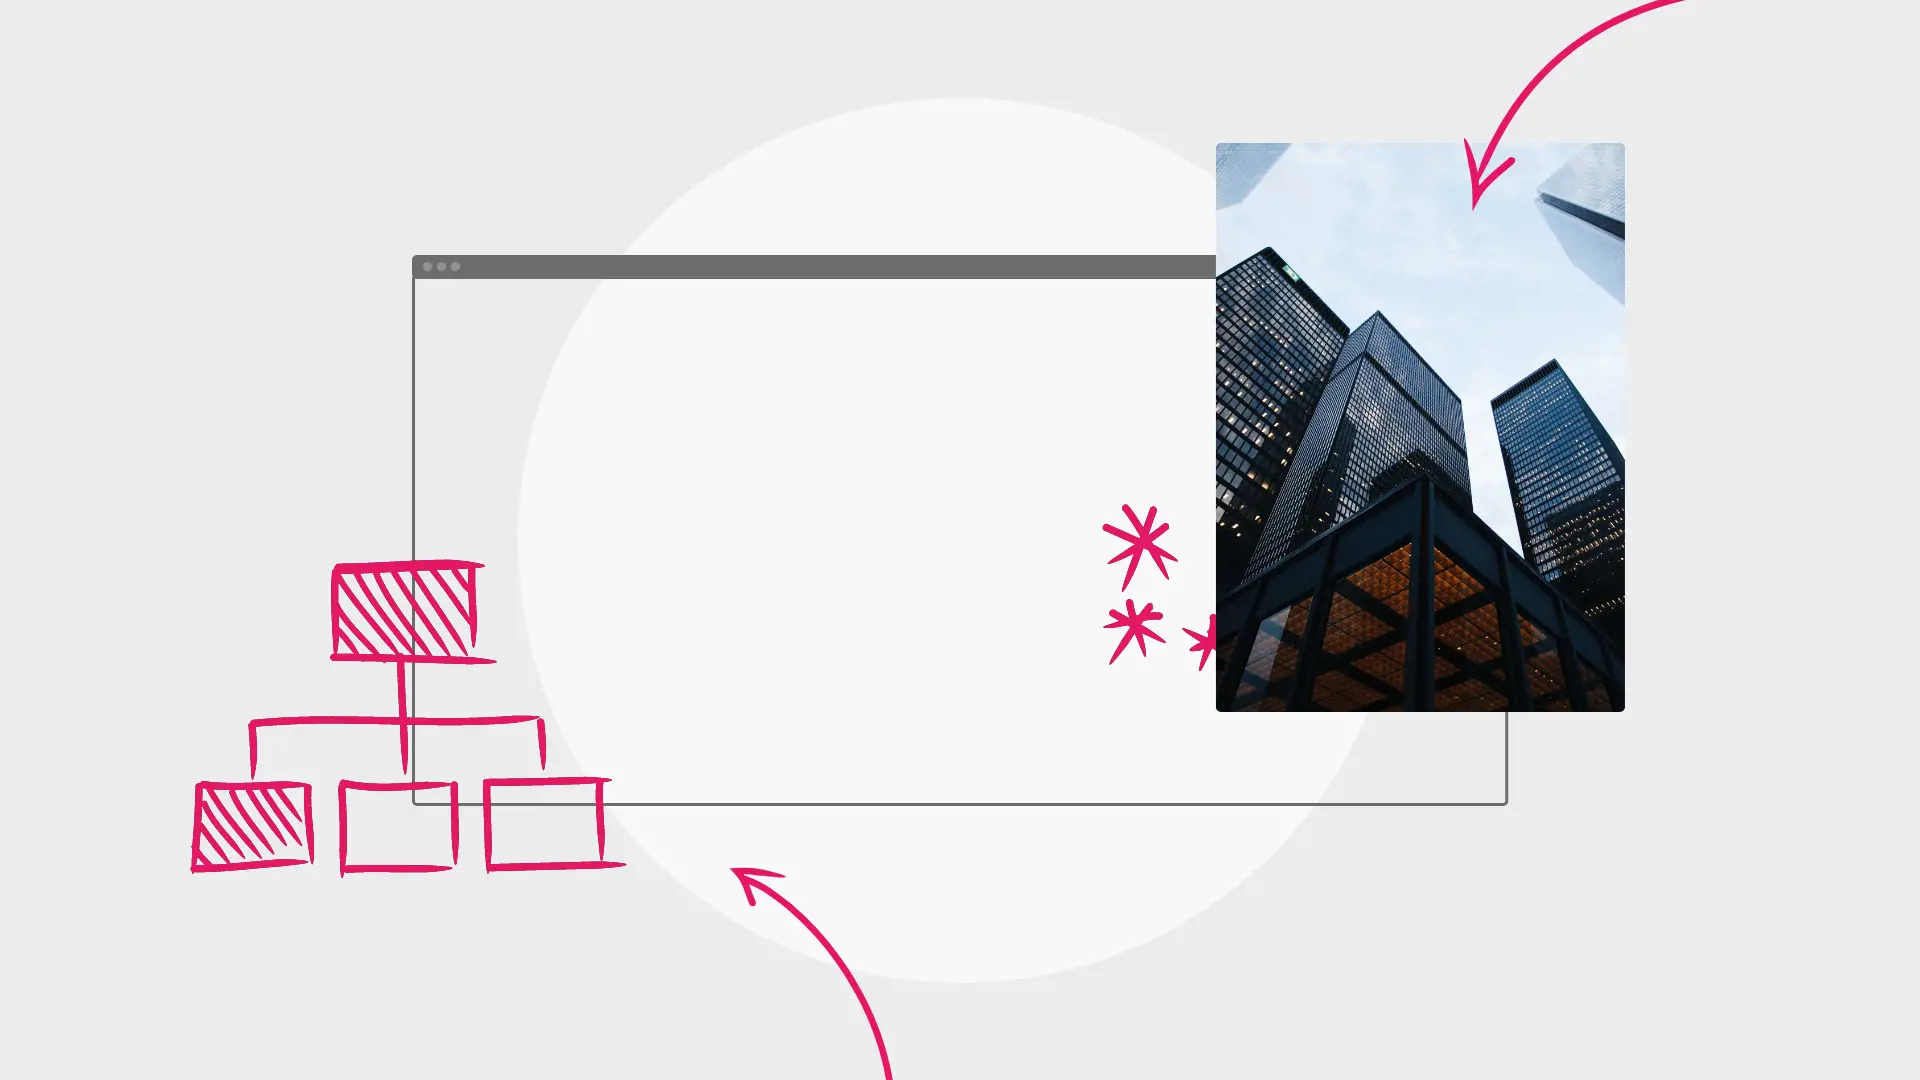 Illustration showing a browser window with HTML elements, arrows, and a photo of skyscrapers, representing web development concepts.